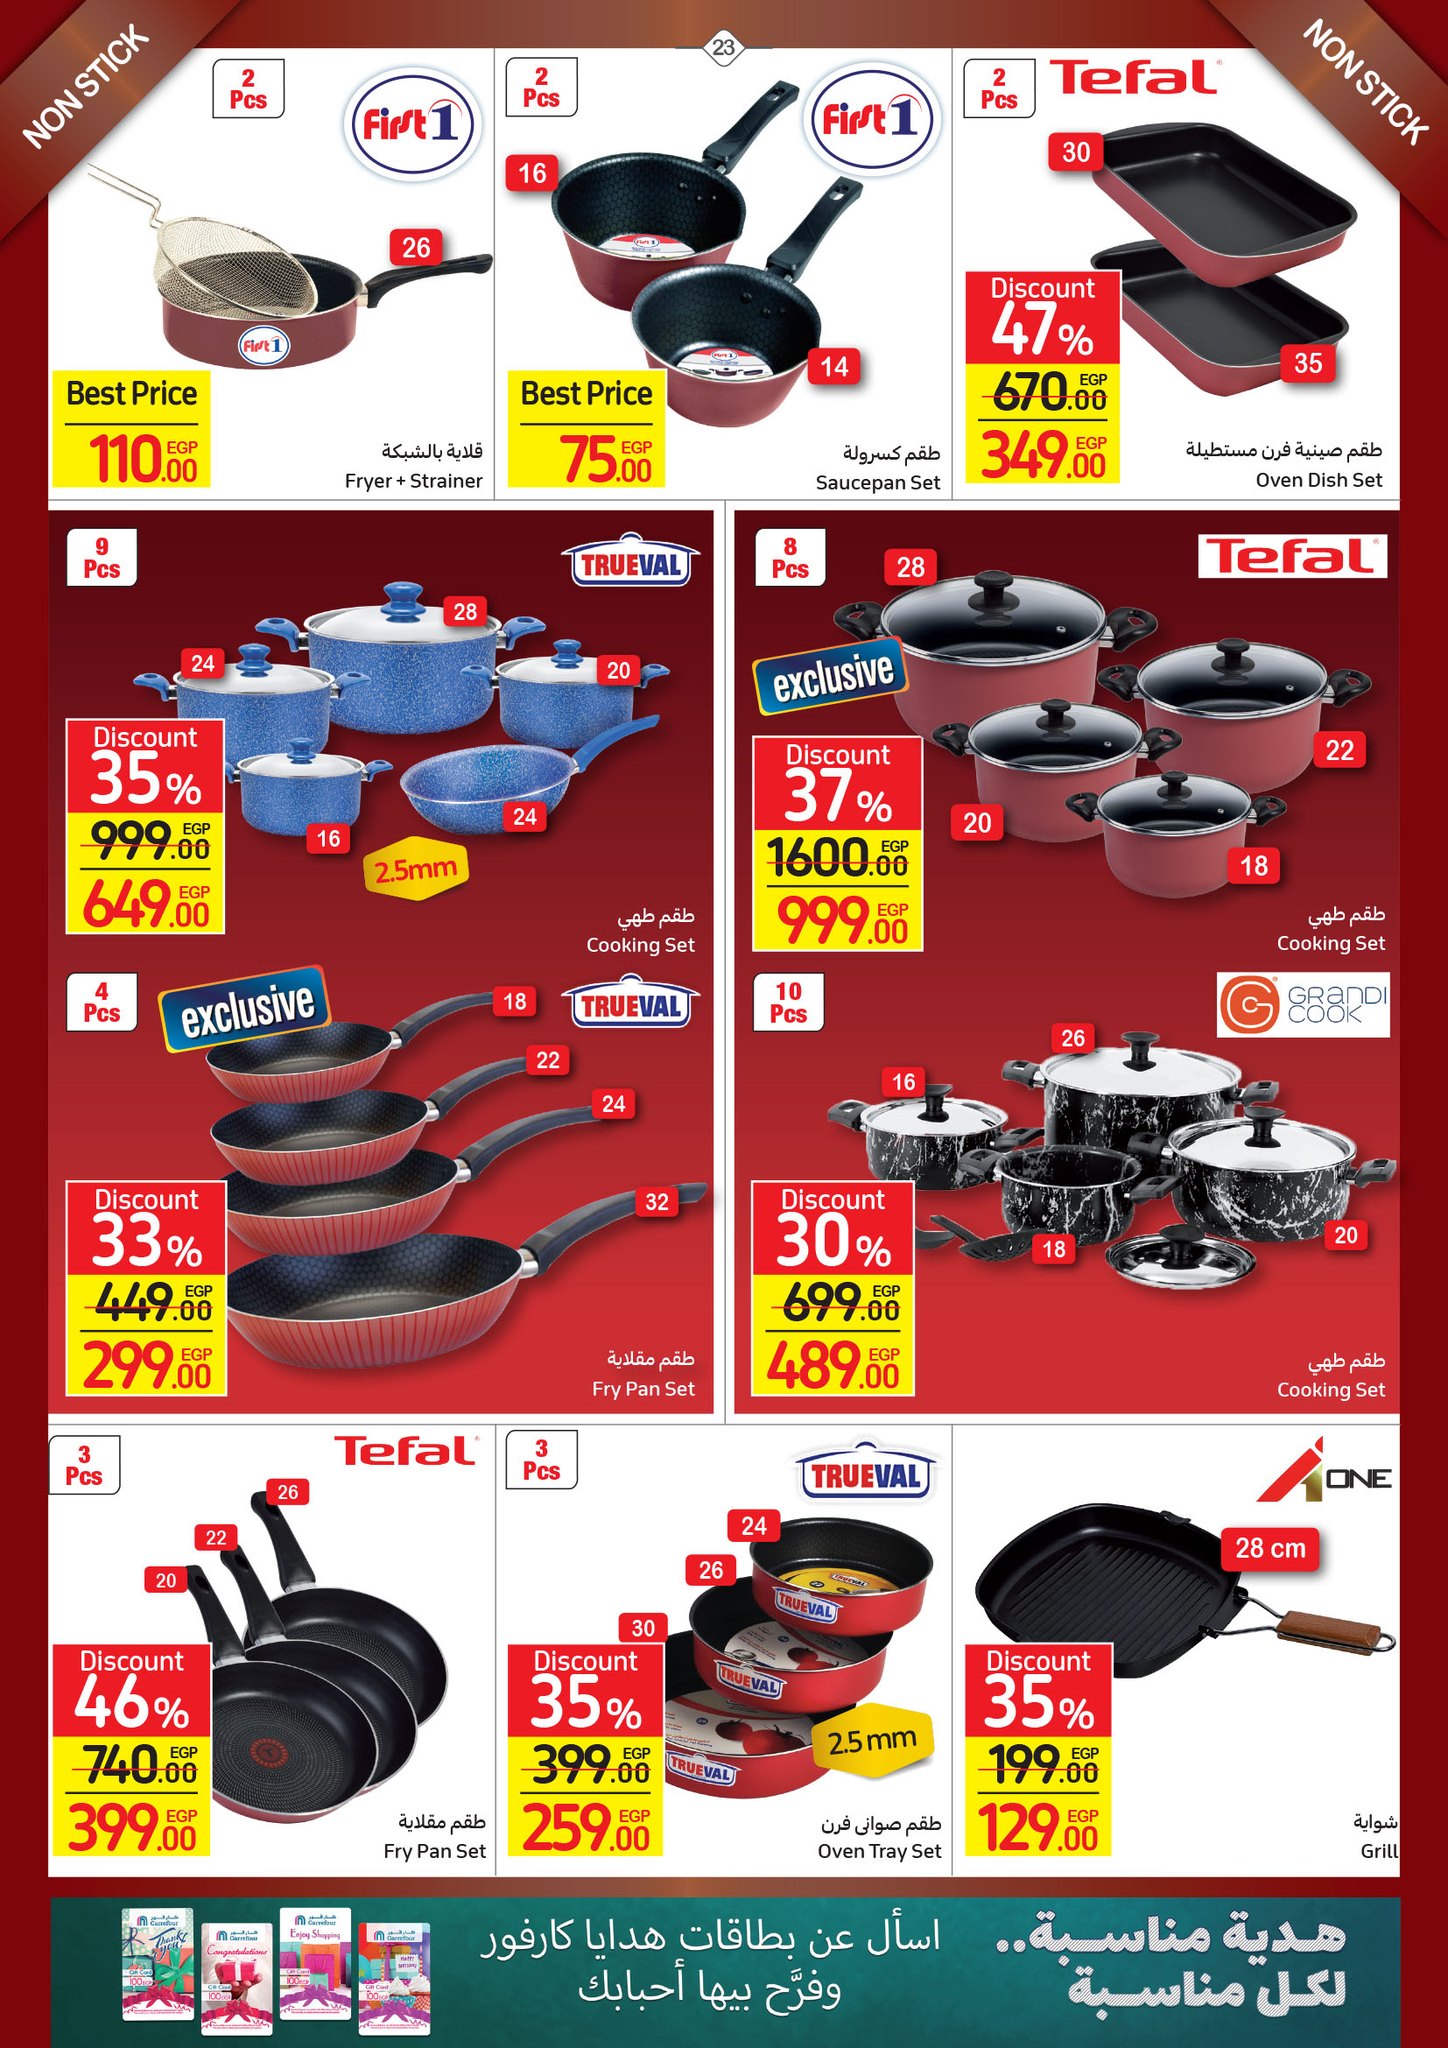 Watch the latest Carrefour half price offers "Last Chance Offer" until December 4, 23